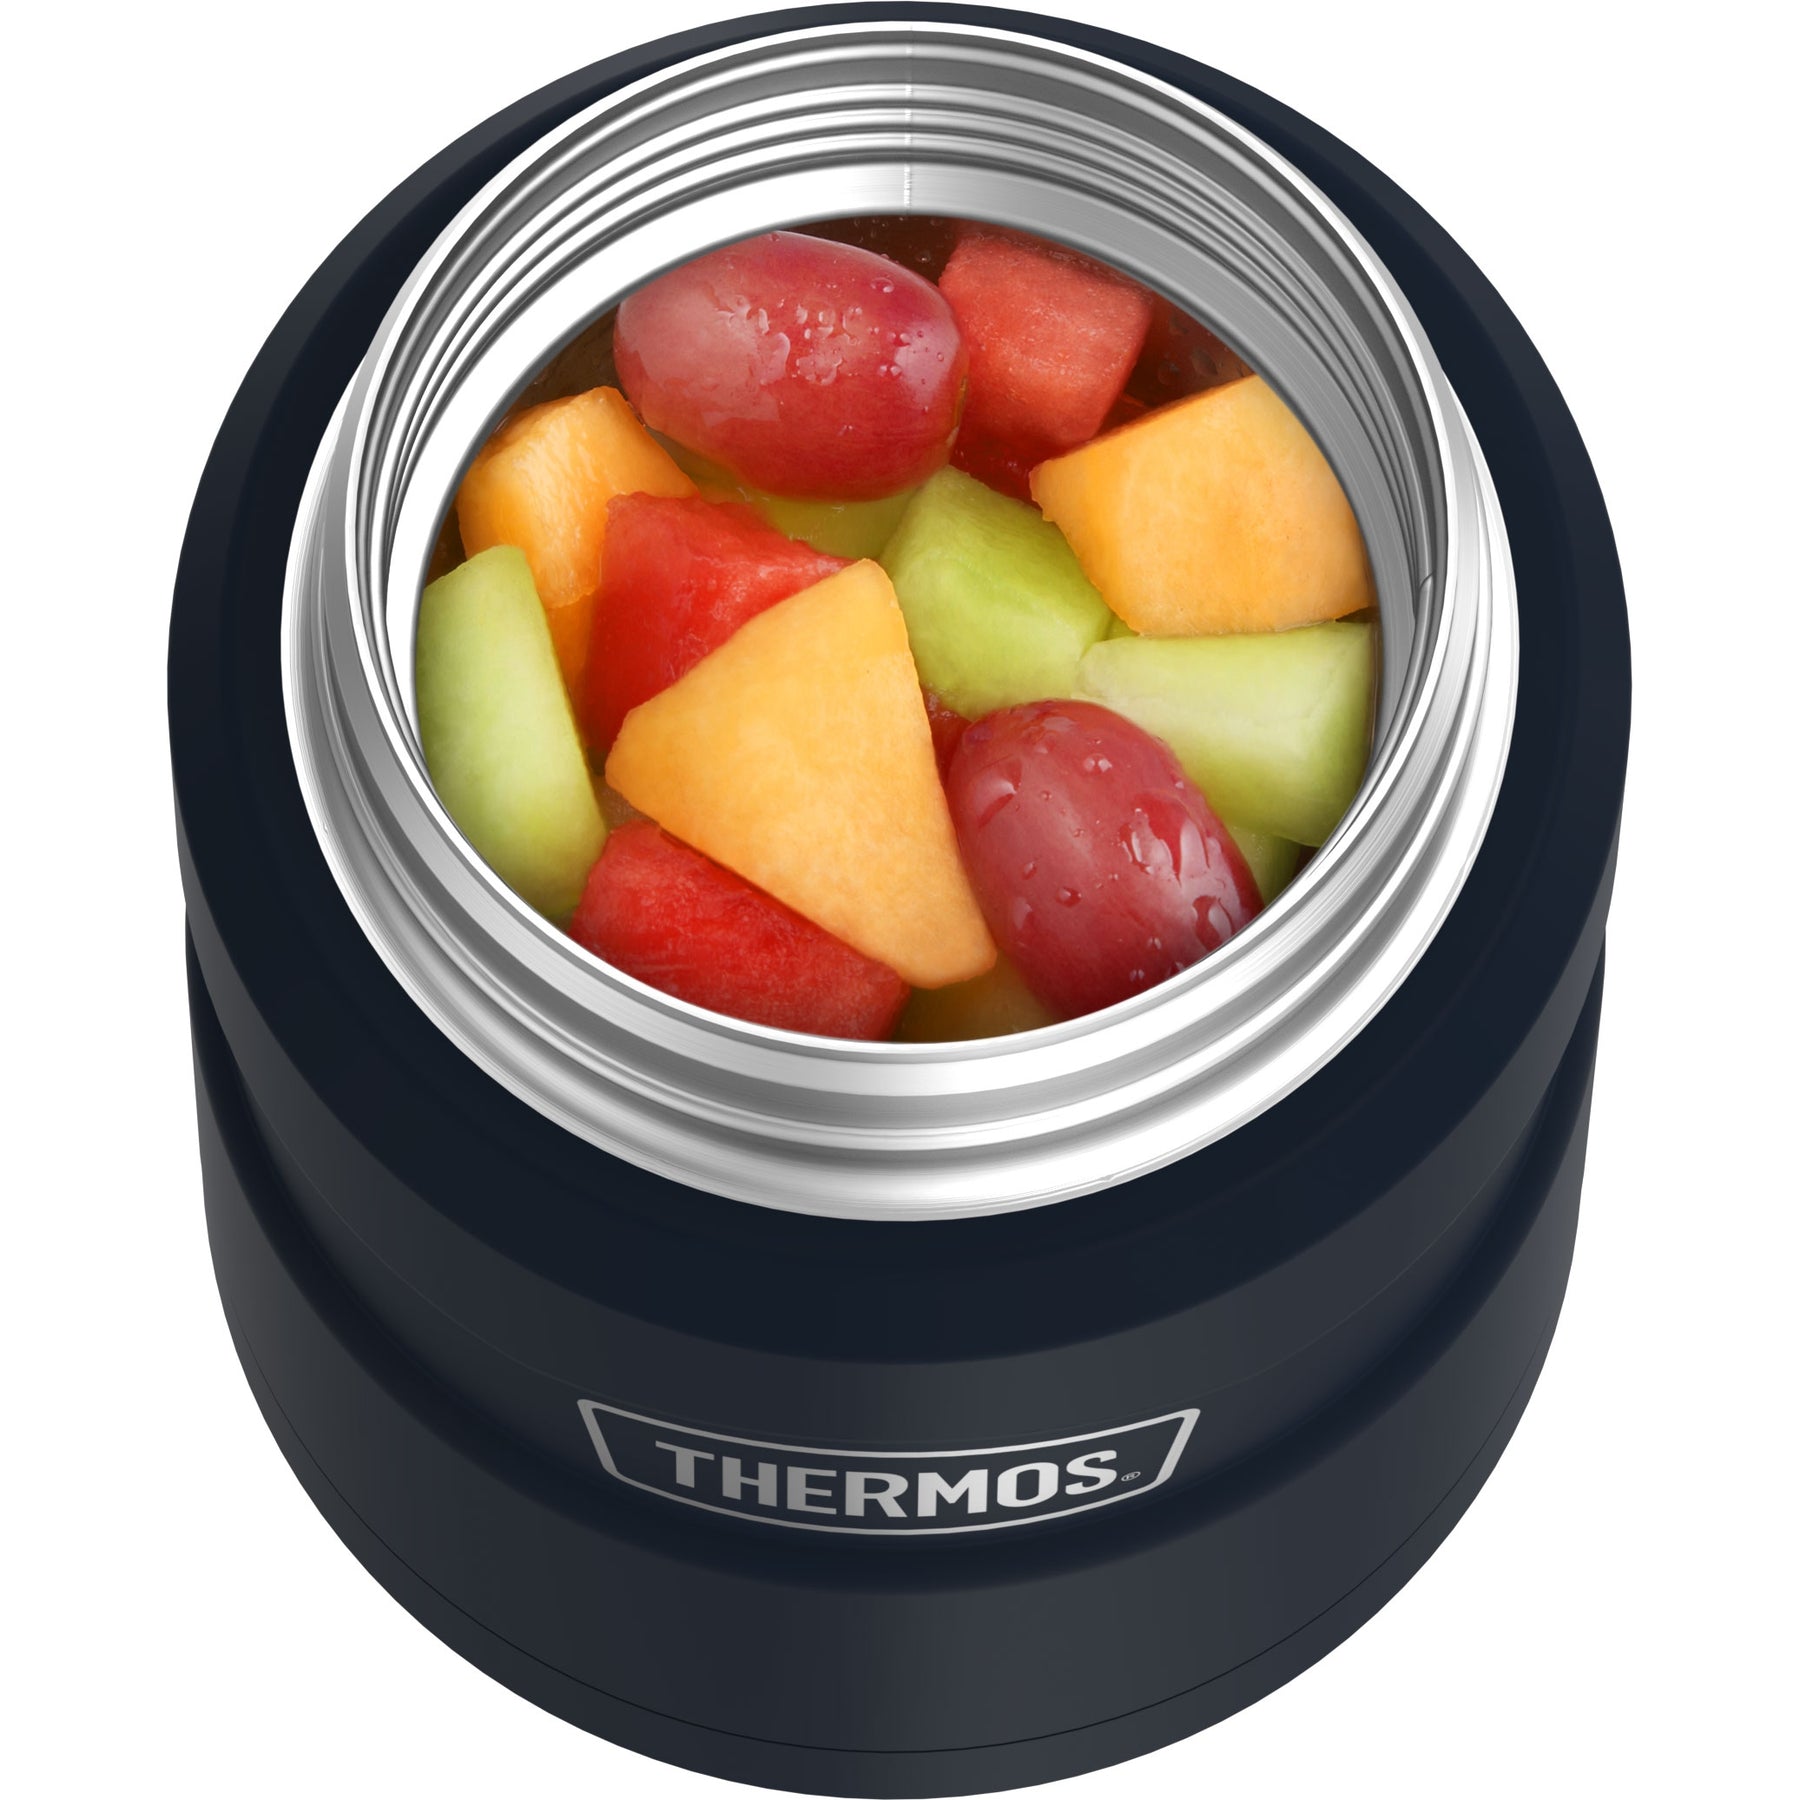 Thermos Stainless Steel King Food Jar 16 Ounce Insulated with